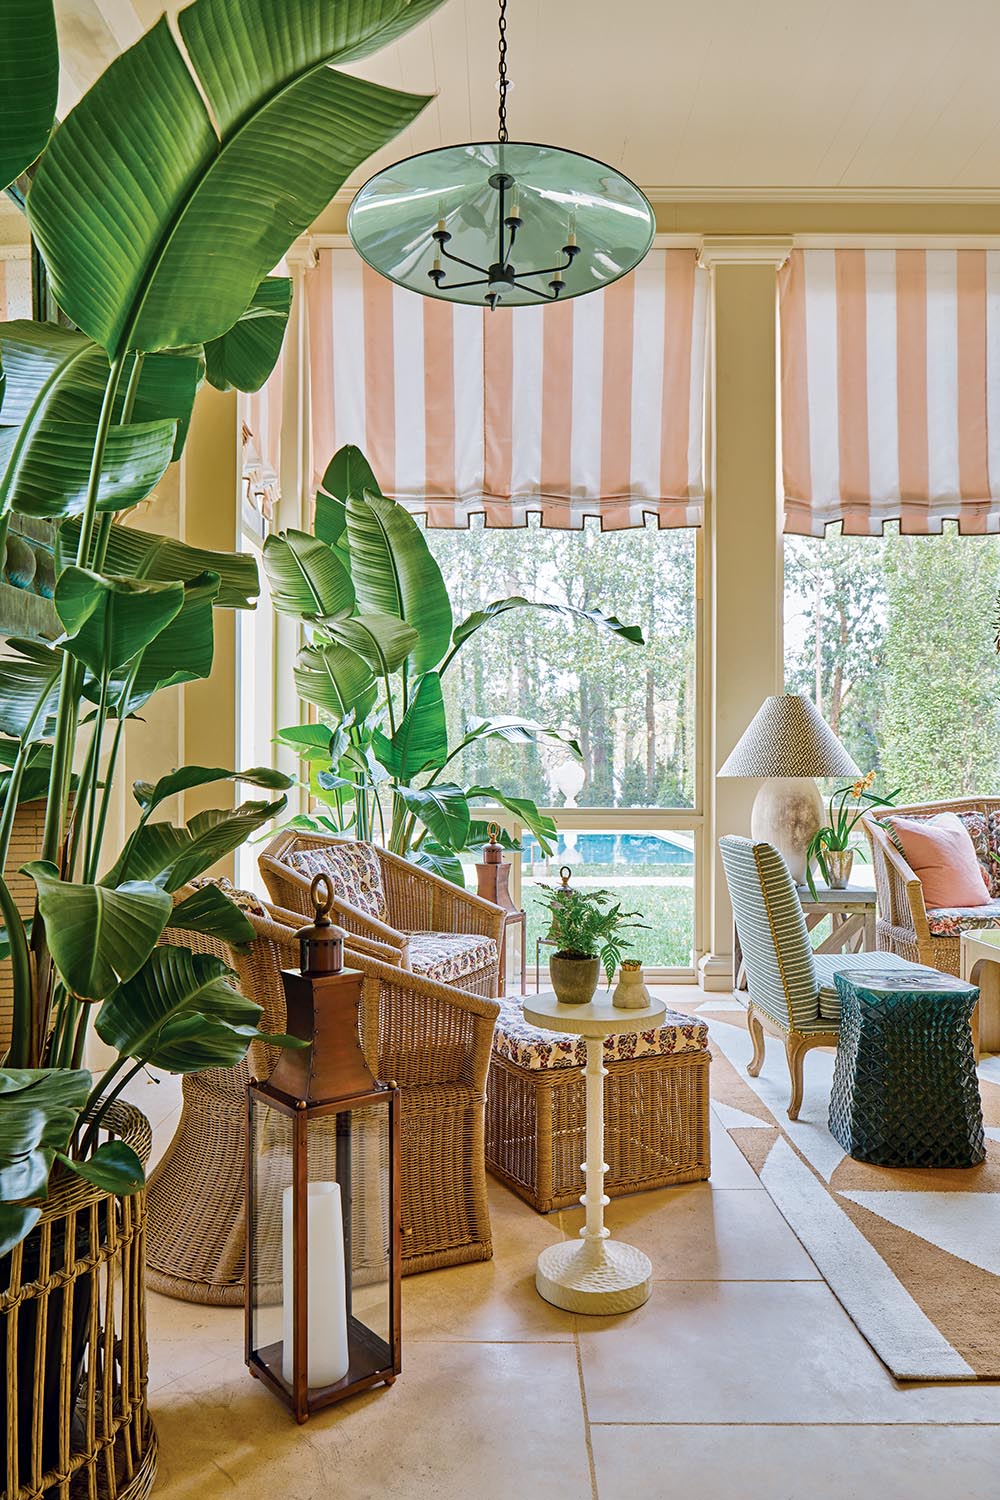 Screened porch with wicker chairs and ottoman, potted bird of paradise plants, large brass lantern on floor, pendant light with inside of shade painted haint blue.